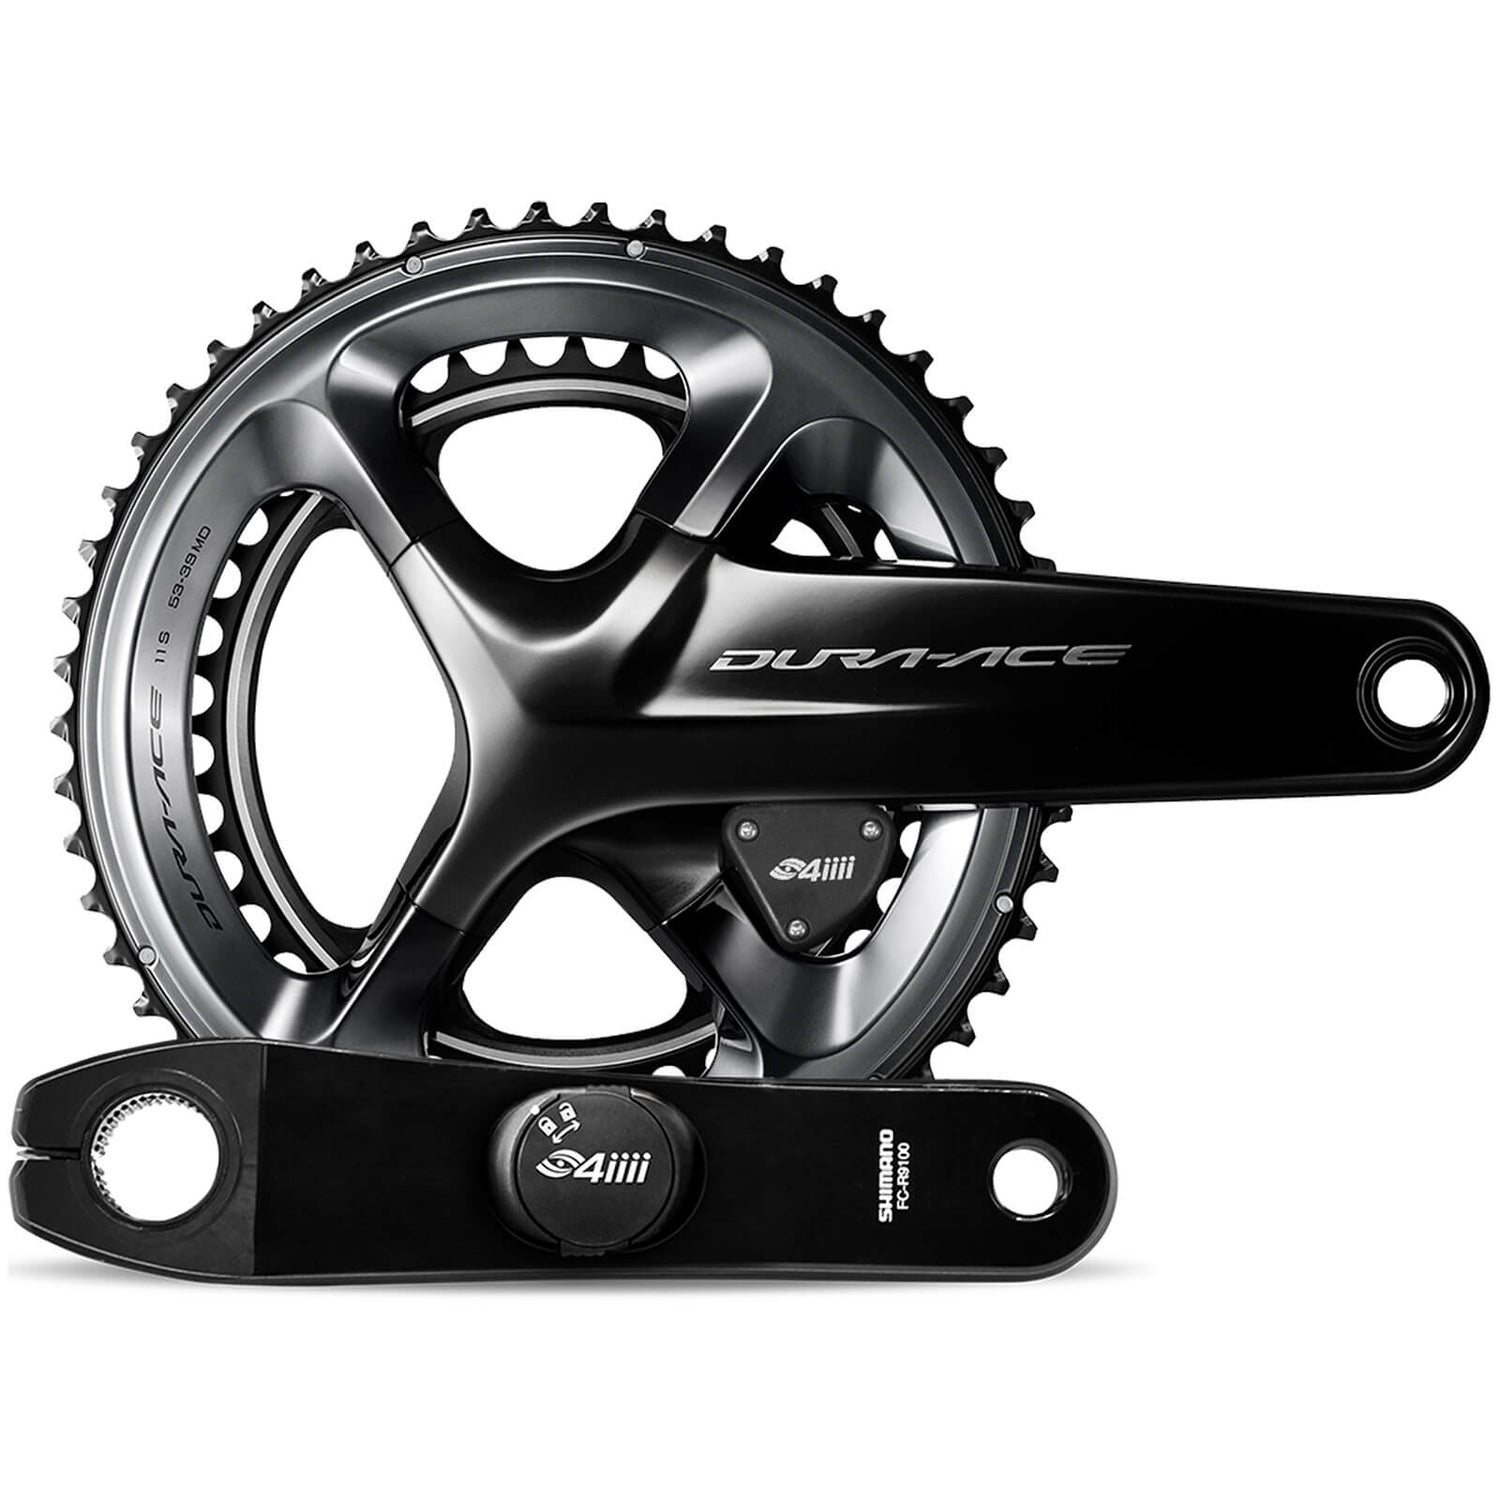 4iiii Precision Pro Dual Sidedパワーメーター - Dura Ace R9100